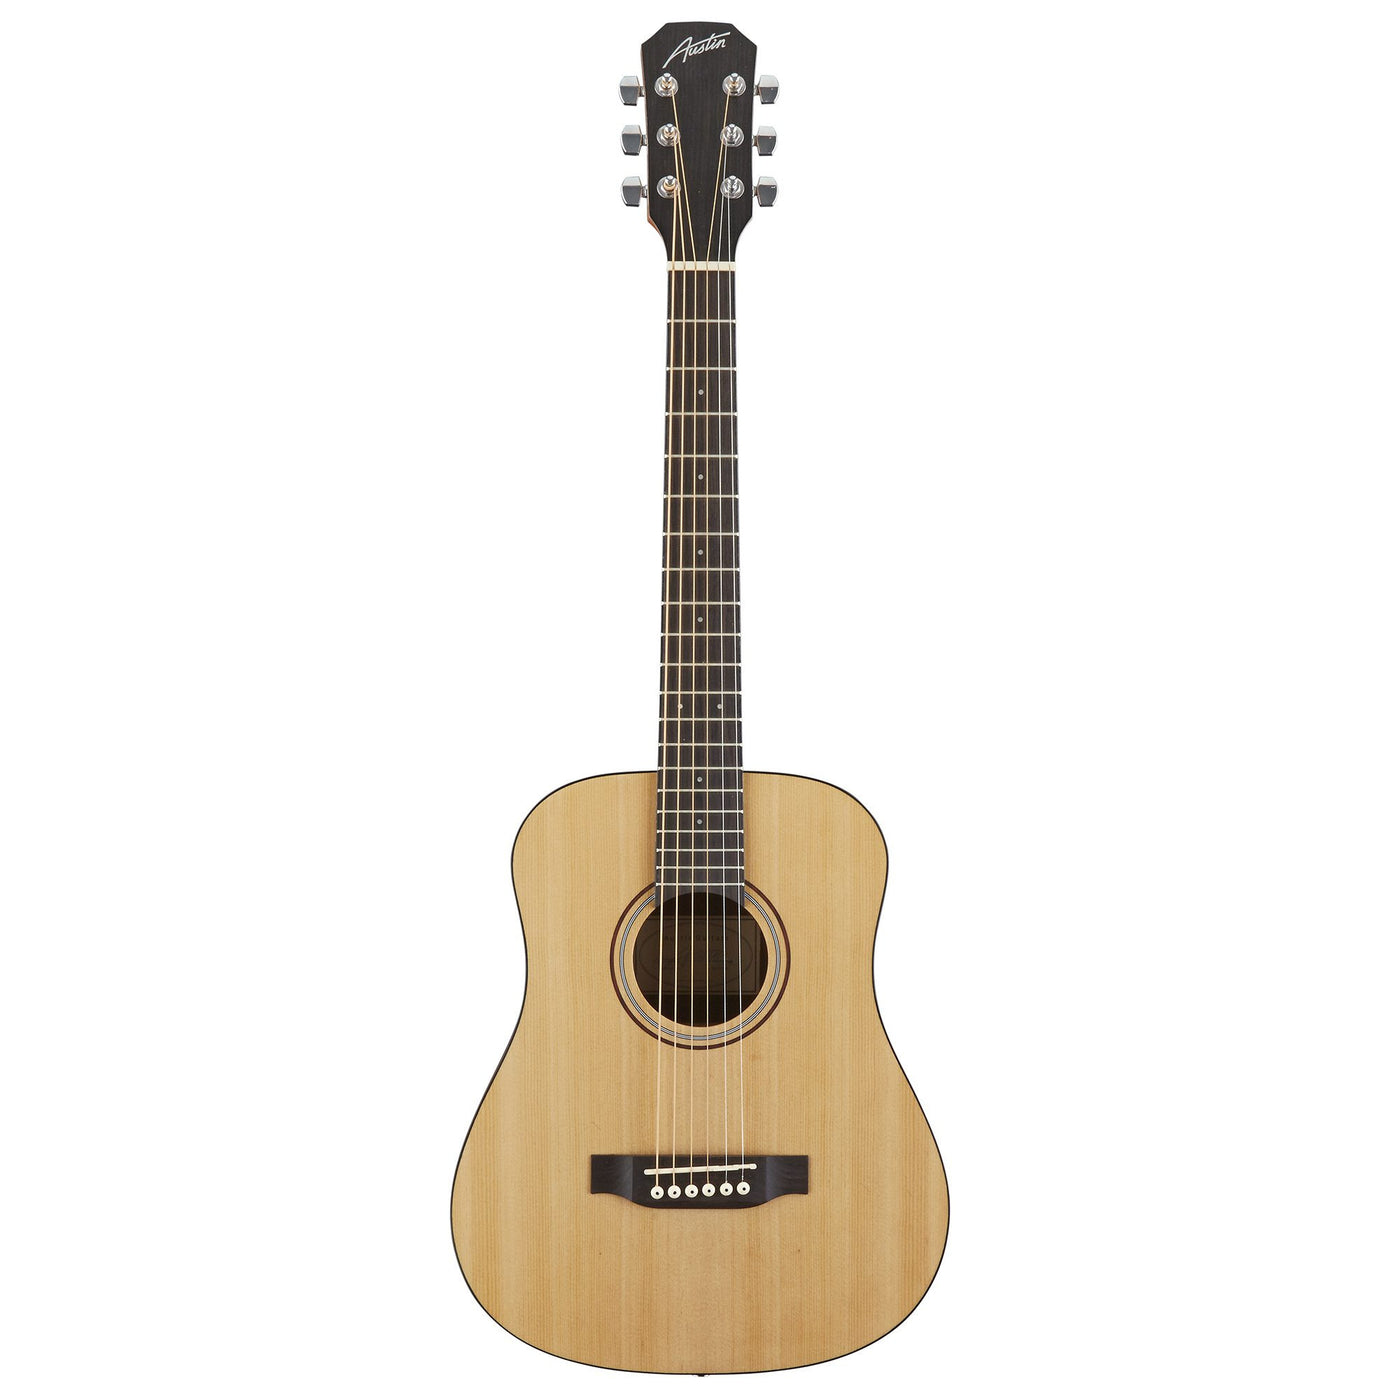 Austin Travel Size Dreadnought Acoustic Guitar, Satin Natural with Gig Bag